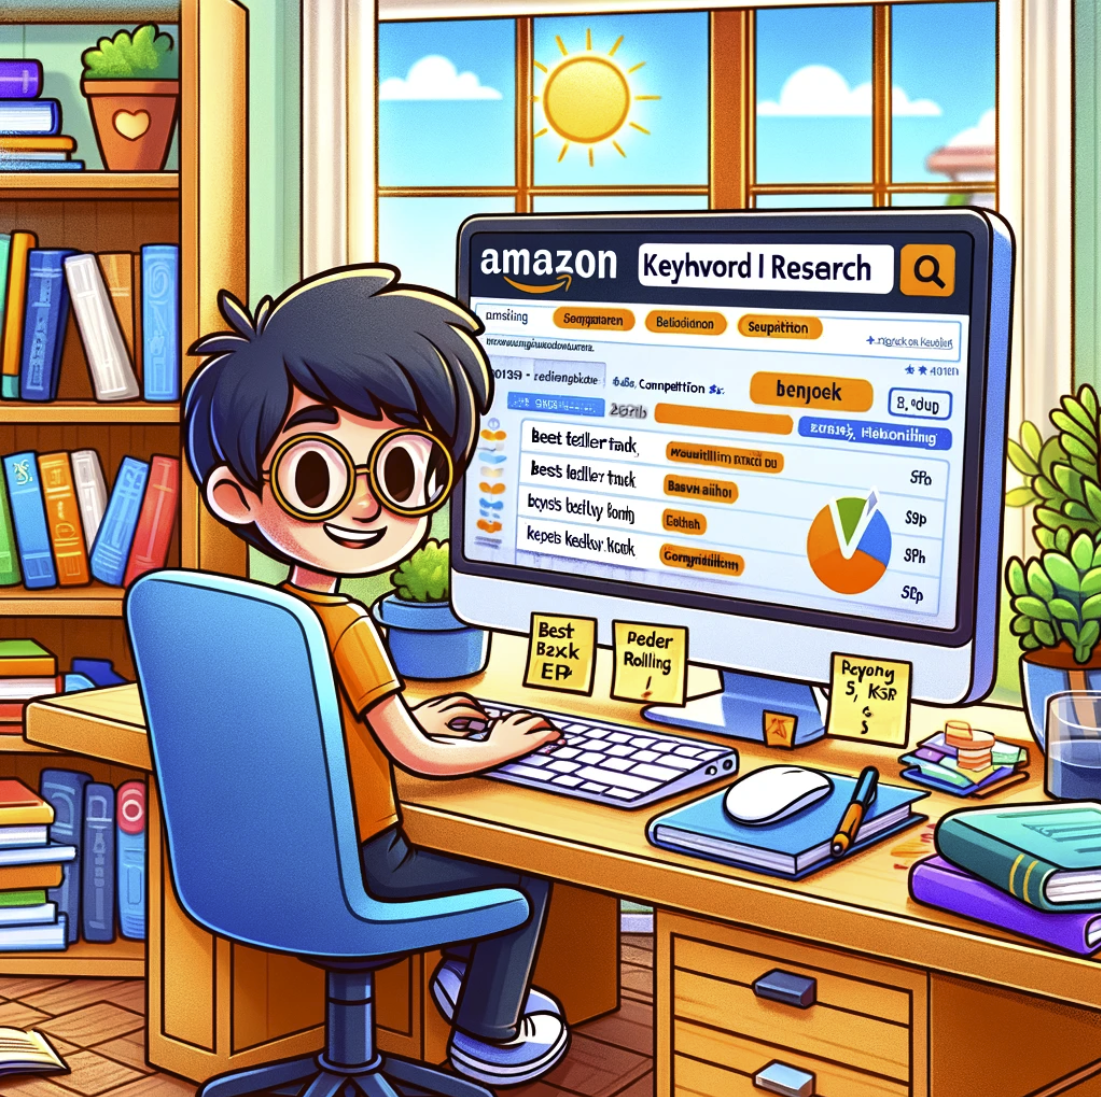 Here's a cartoon image that captures the essence of keyword research for Amazon KDP. The illustration shows an author engaged in the process, surrounded by books and a computer displaying keyword metrics. This image creatively represents the journey of discovering profitable keywords for successful book publishing.